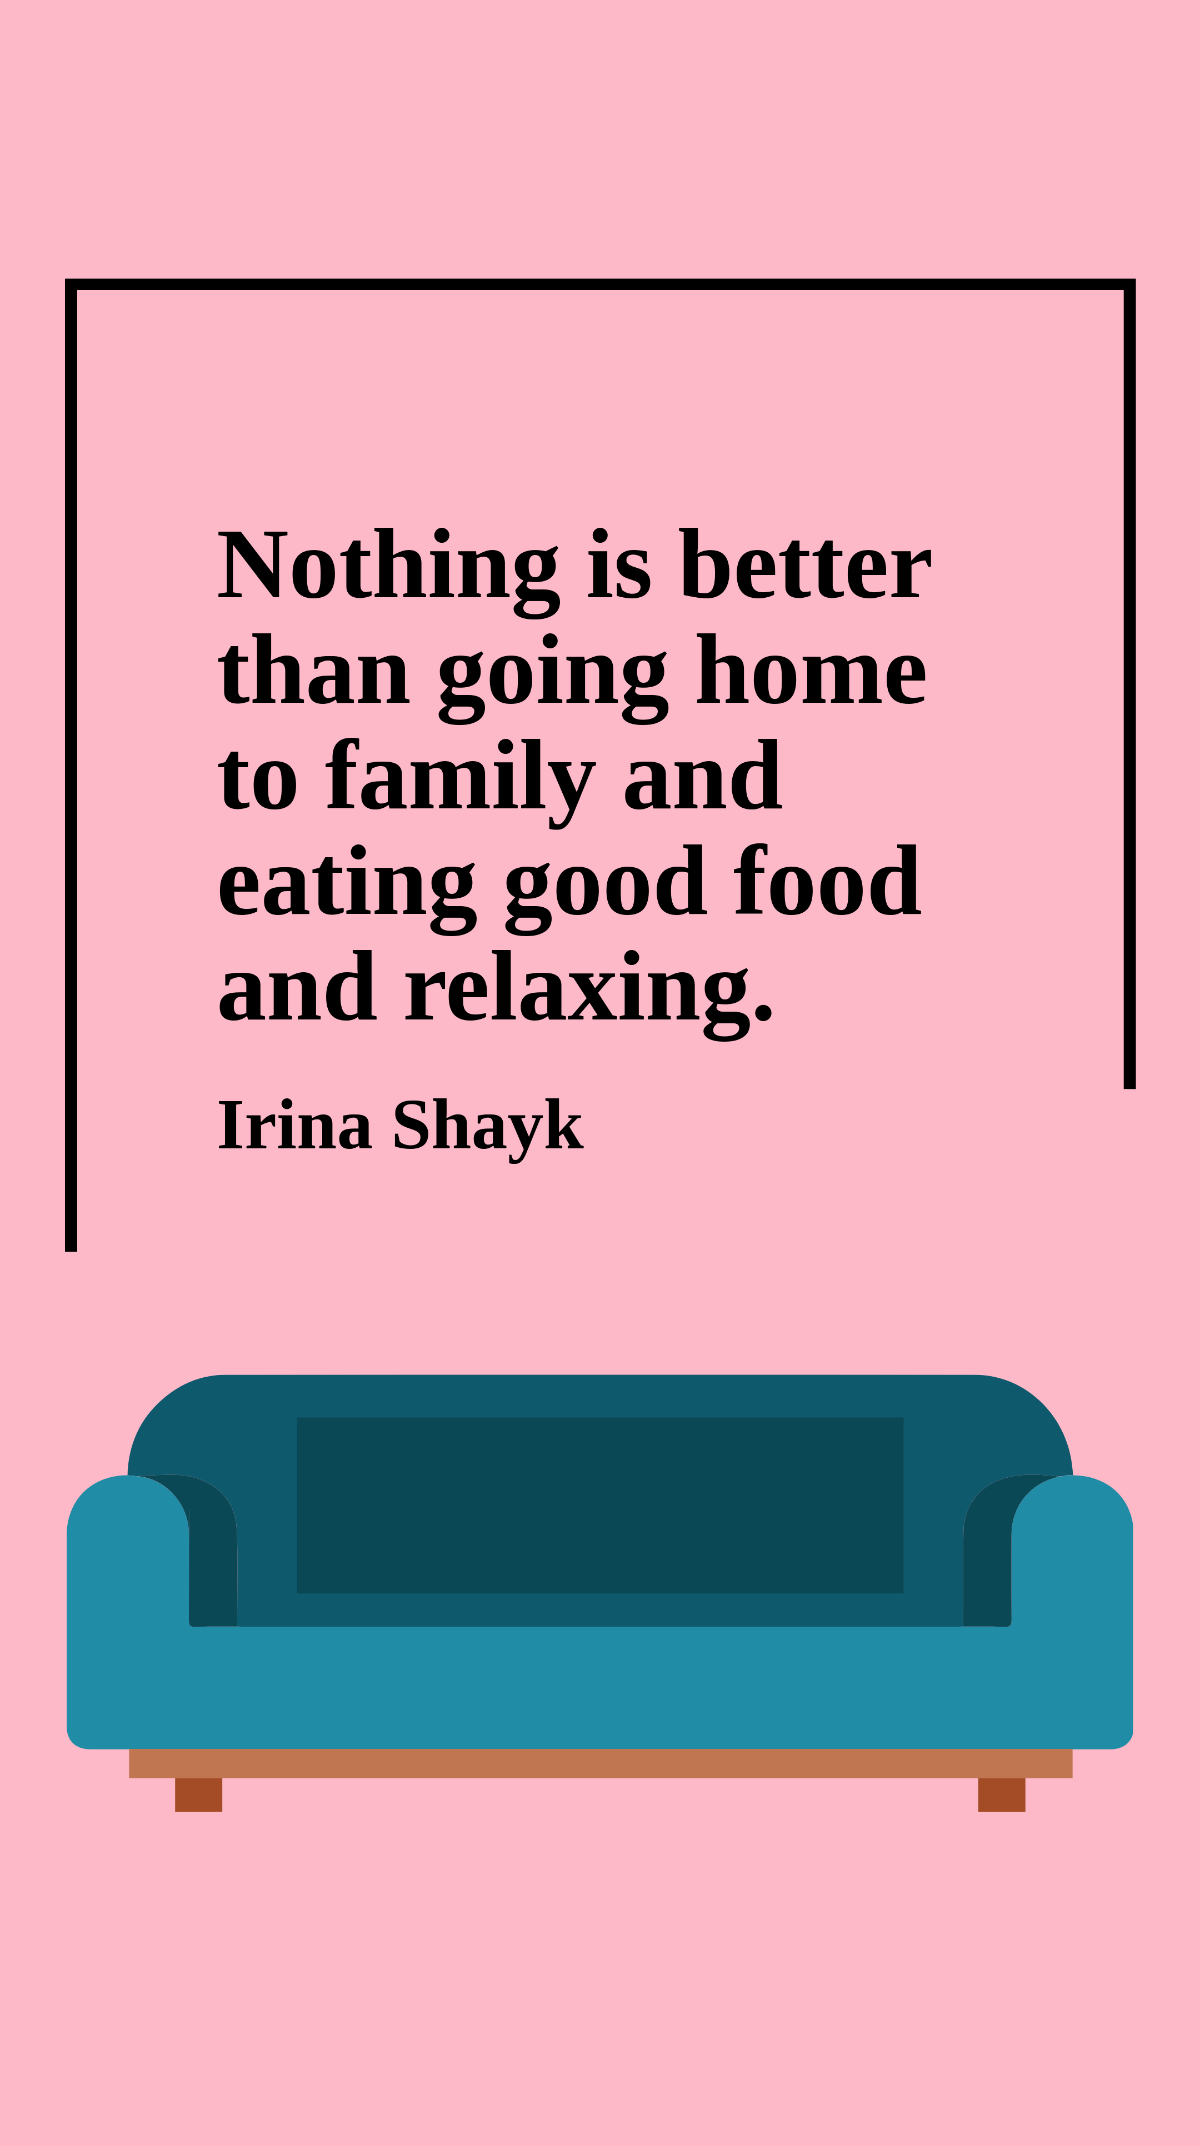 Irina Shayk - Nothing is better than going home to family and eating good food and relaxing.